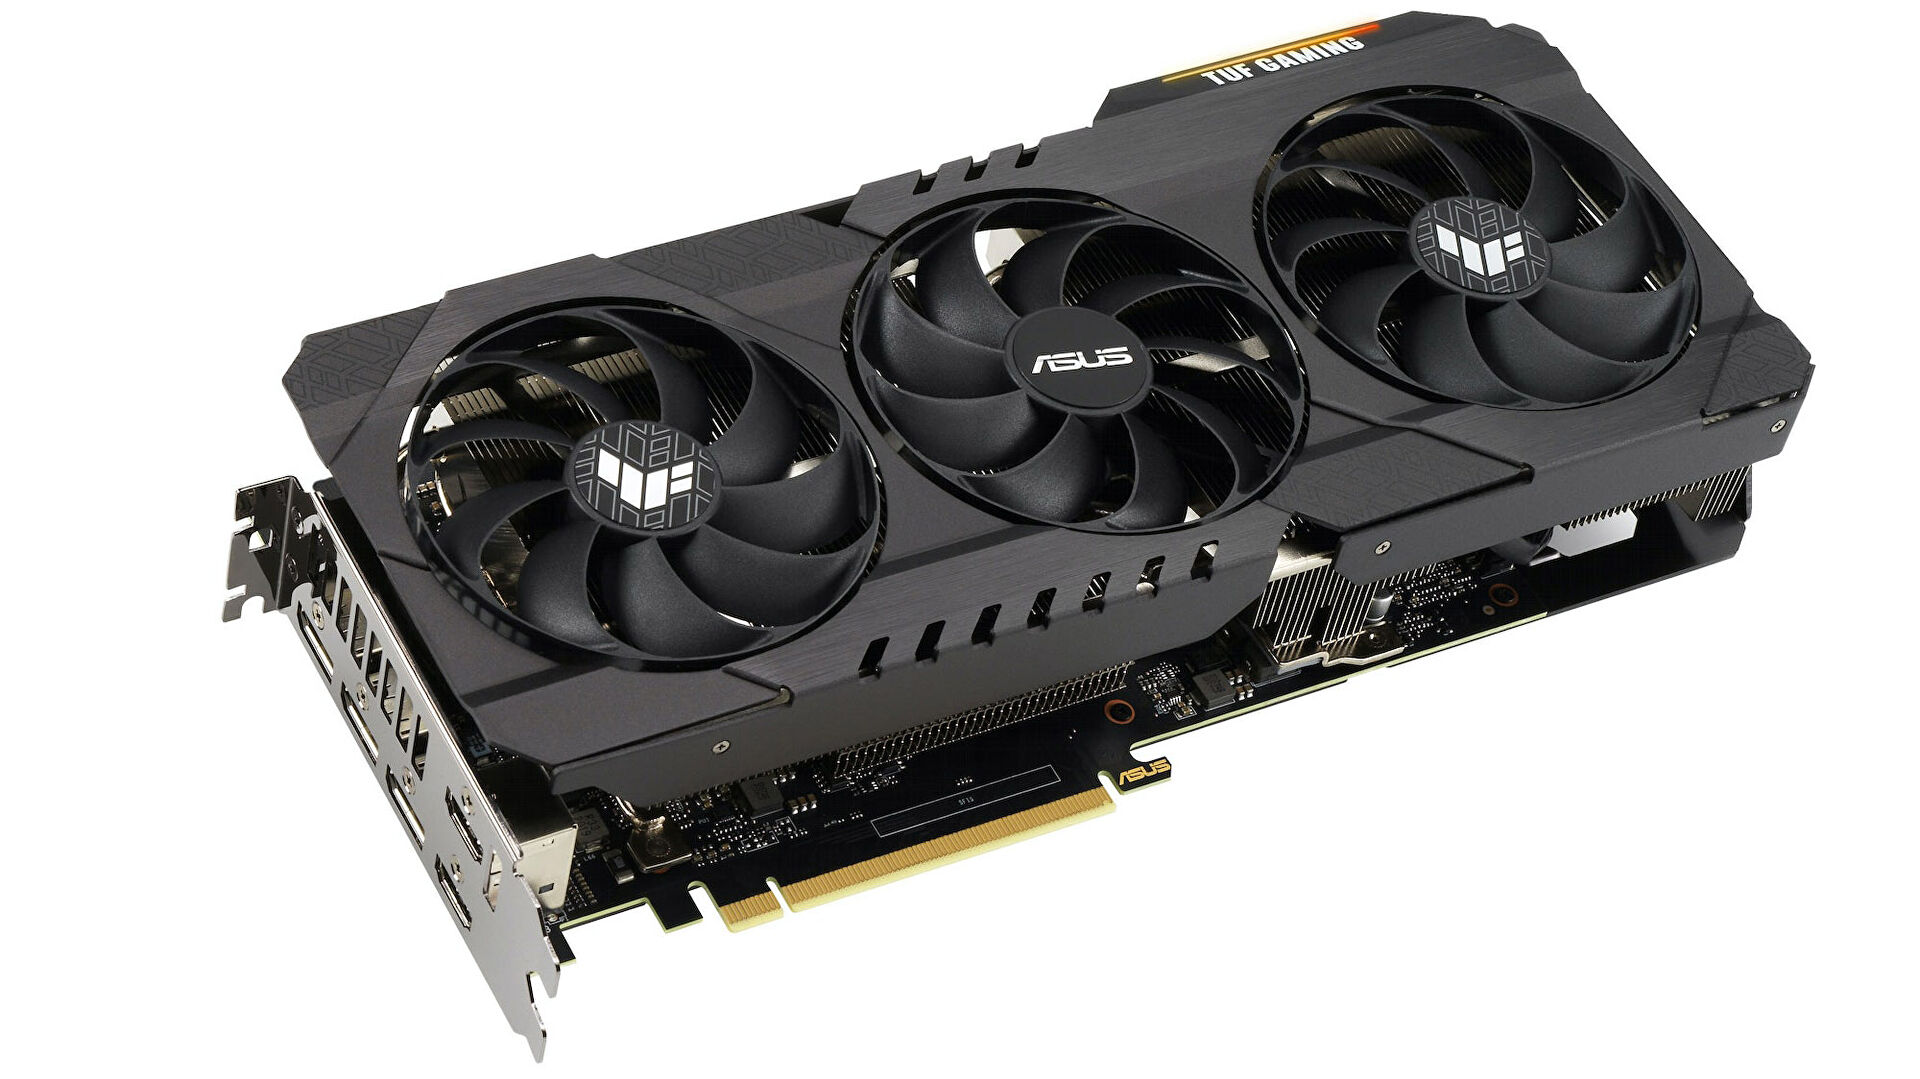 The Asus RTX 3080 Tuf Gaming OC V2 is down to £650 at Overclockers